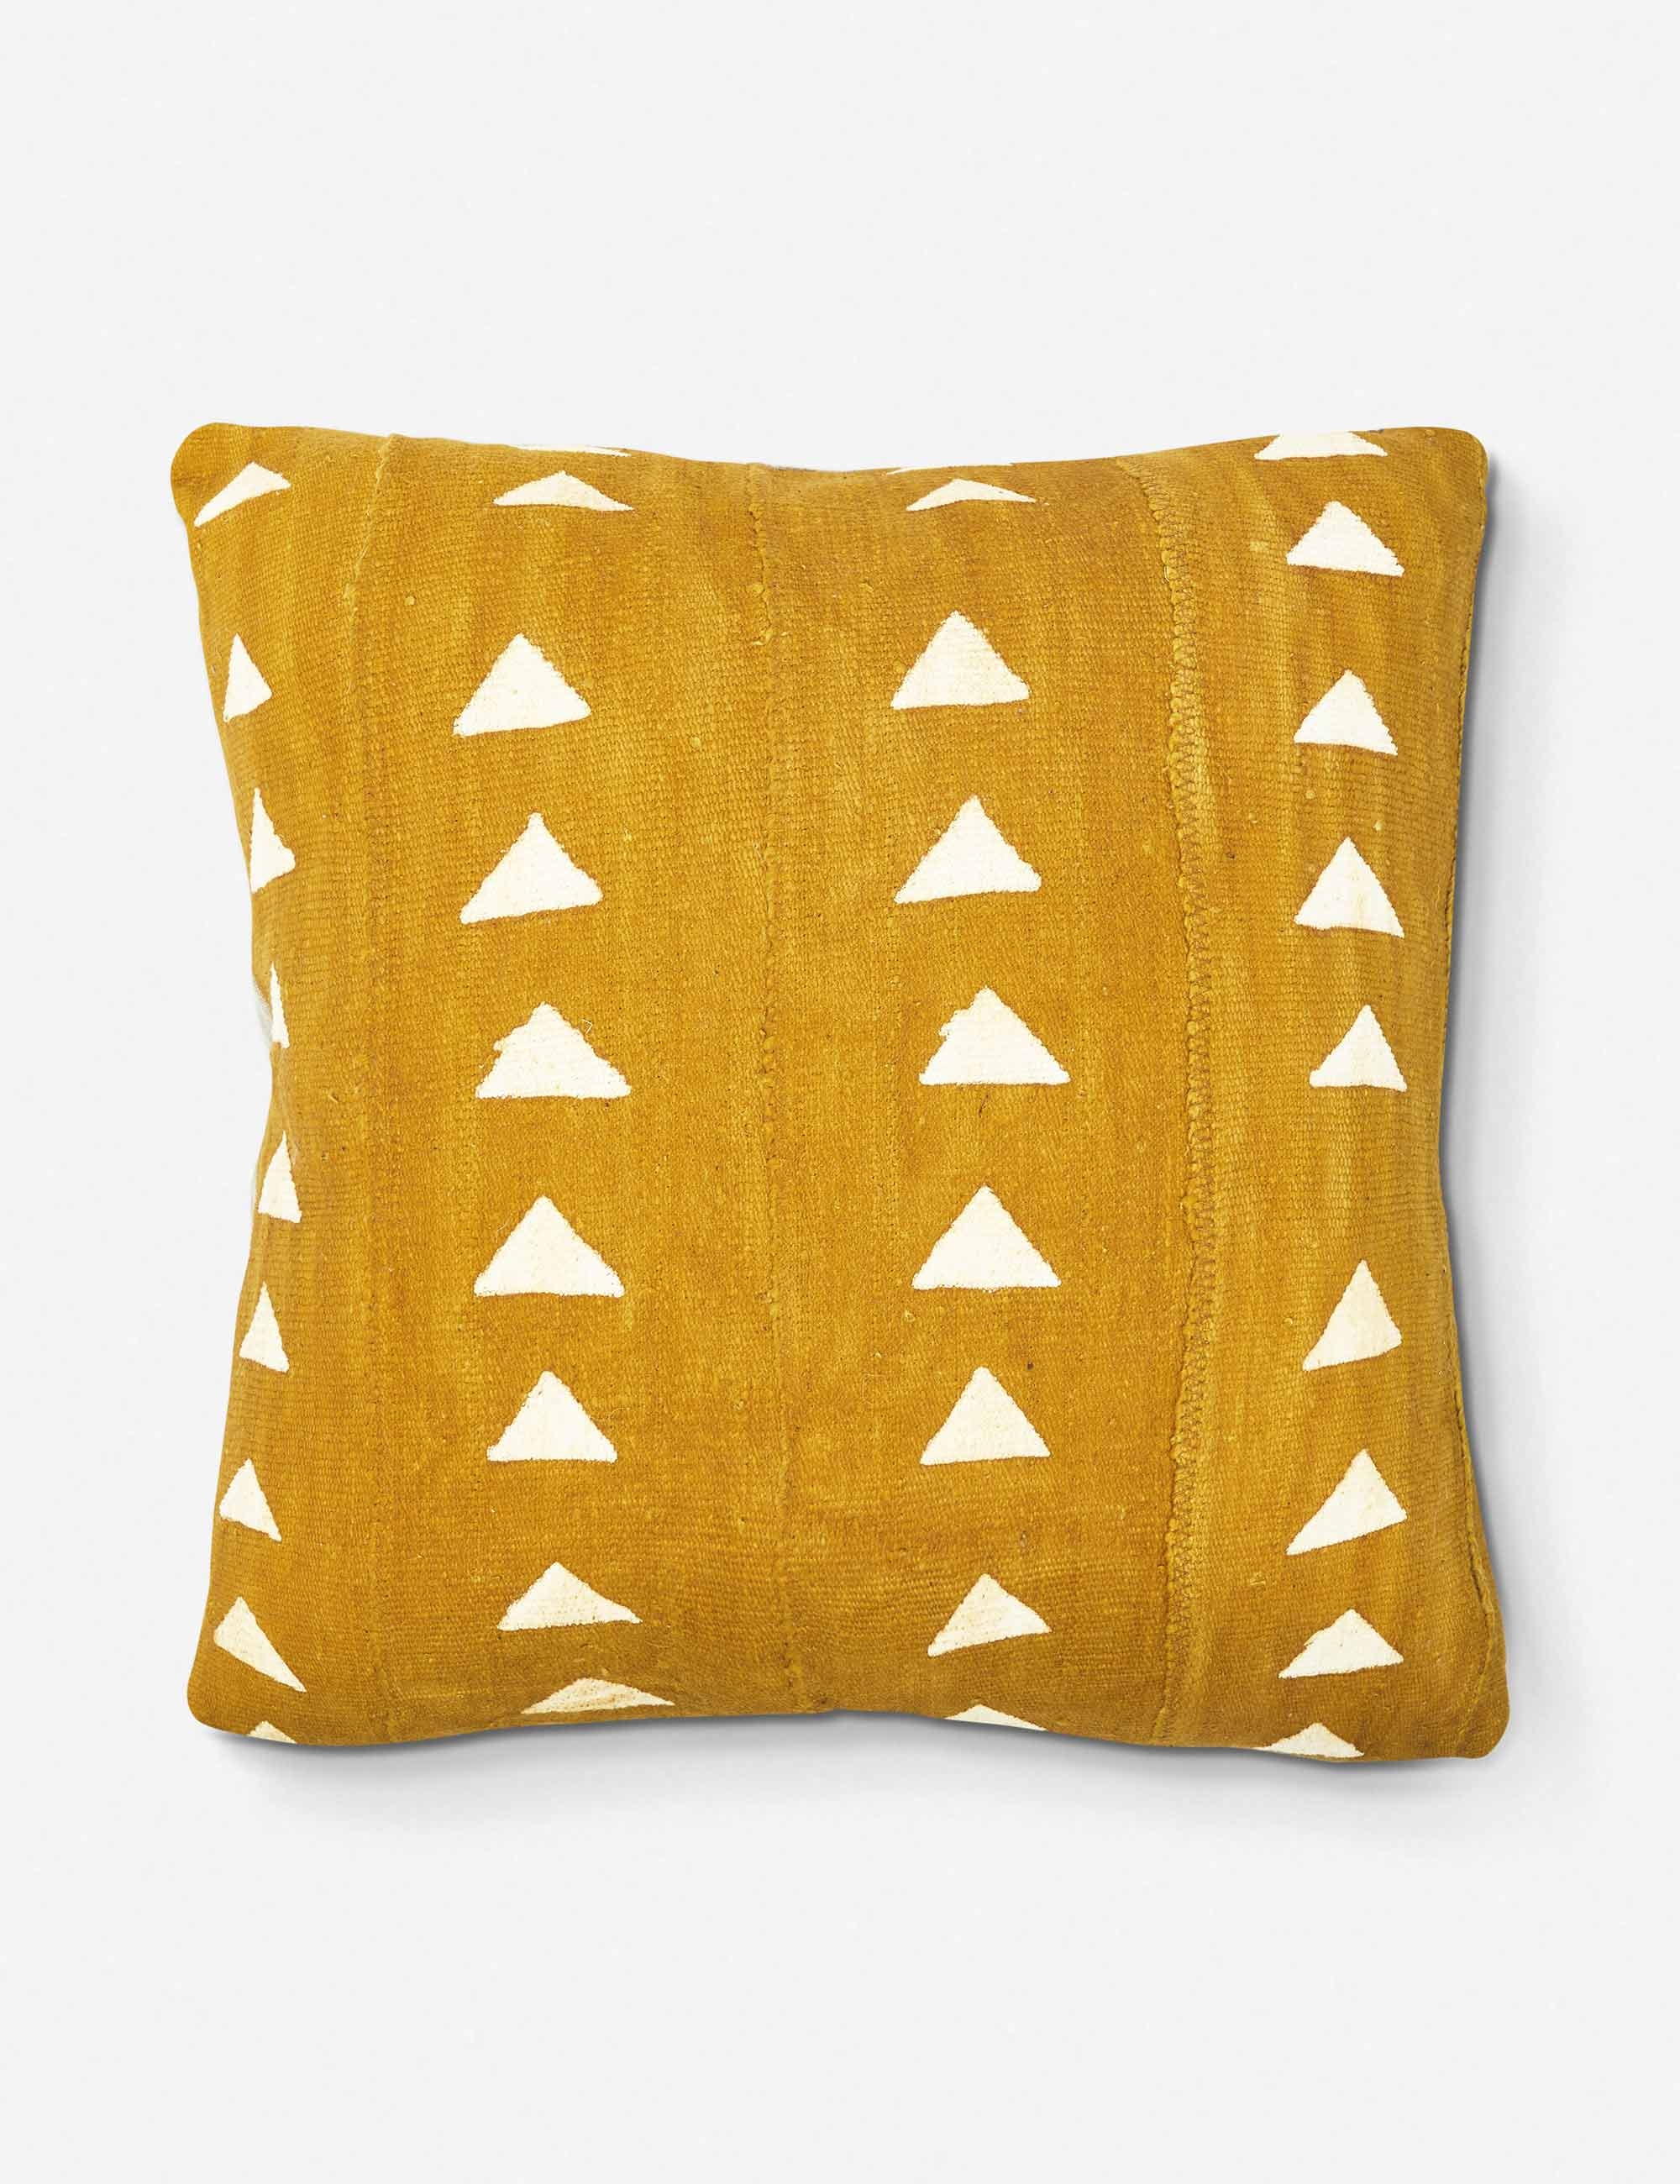 Imani One of a Kind Mudcloth Pillow - Image 0